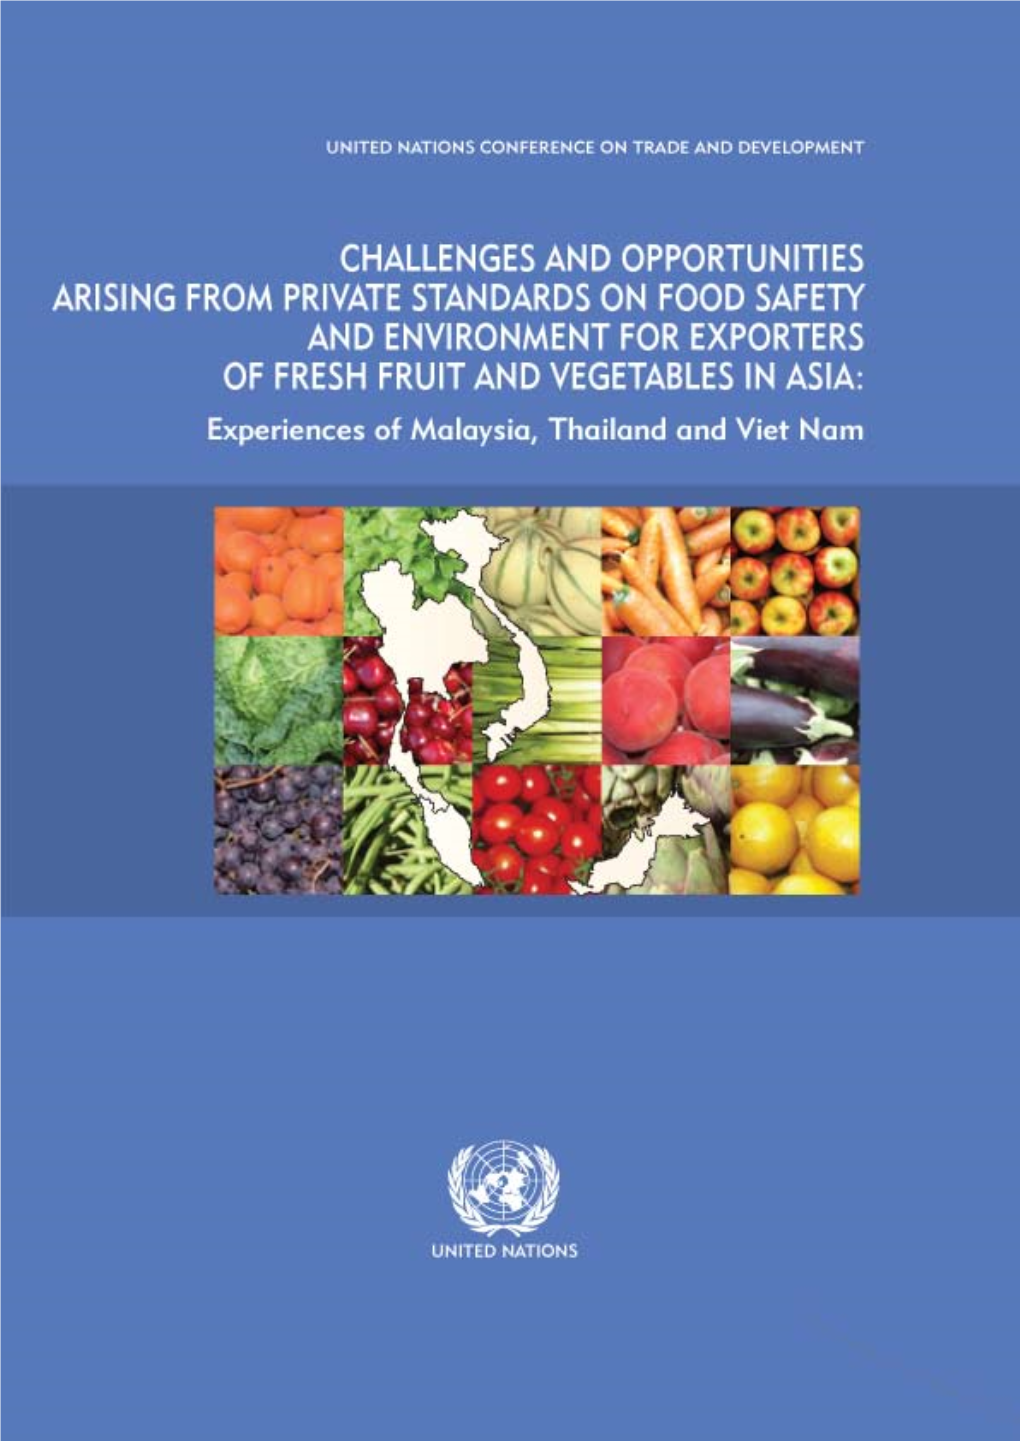 Challenges and Opportunities Arising from Private Standards on Food Safety and Environment for Exporters of Fresh Fruit and Vegetables in Asia